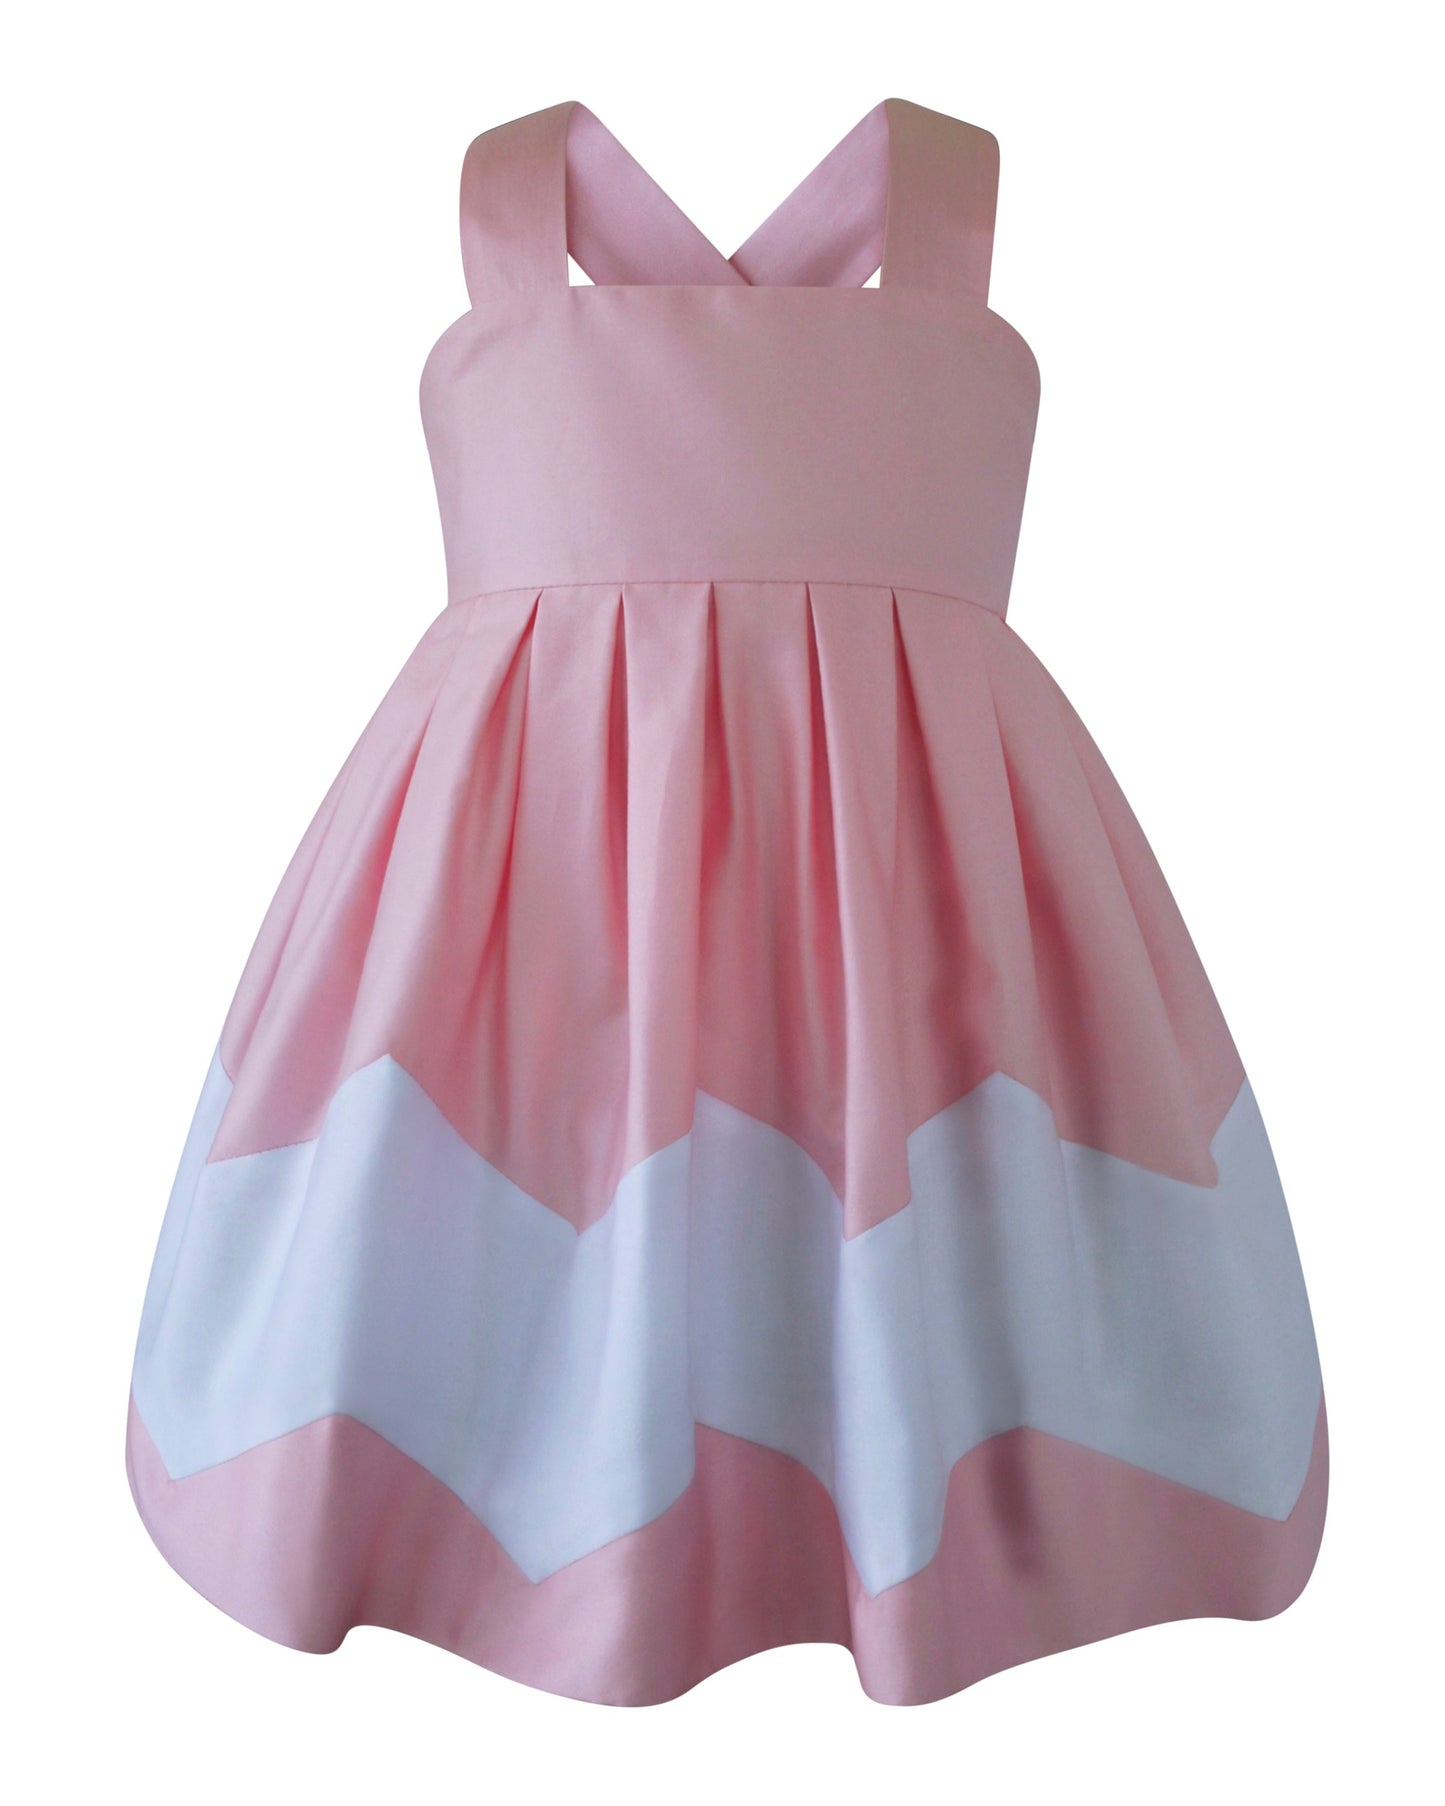 Helena and Harry Girl's Pink and White Chevron Sundress